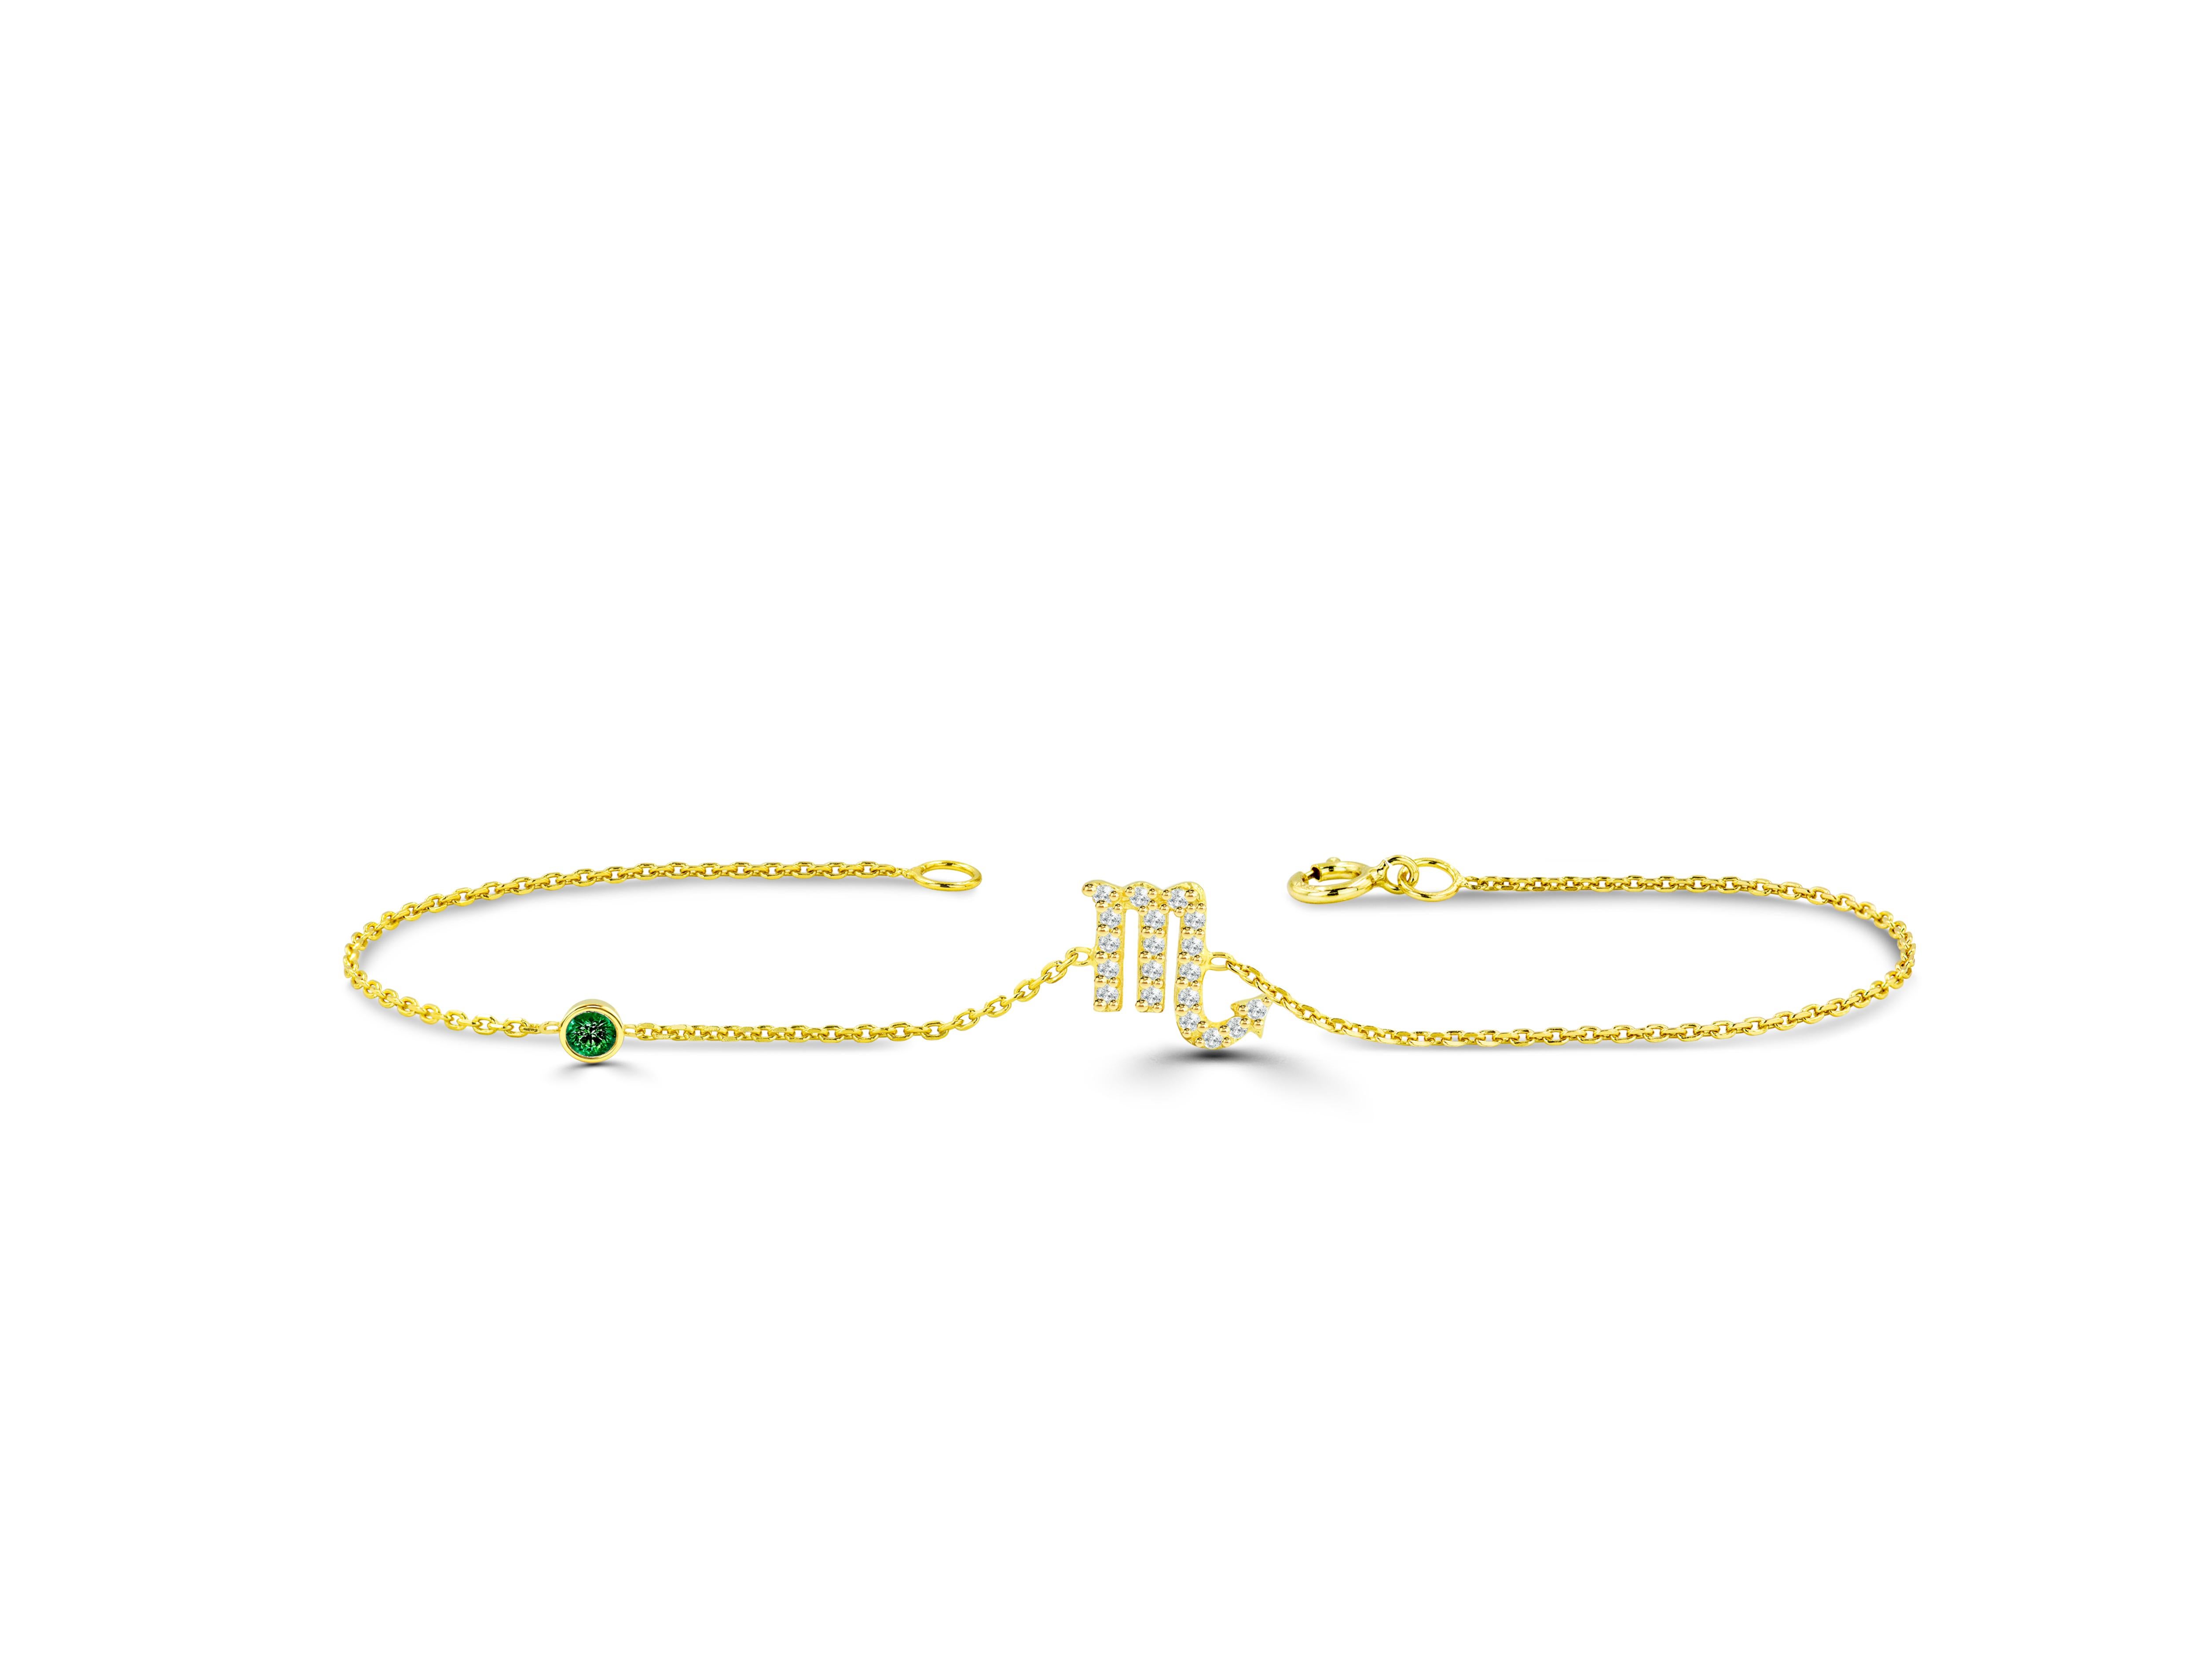 This Scorpio Diamond Bracelet is meant to represent you. This Zodiac sign bracelet comes with a birthstone of your choice- Ruby, Sapphire, or Emerald. Our collection of zodiac jewelry includes this stunning Diamond Scorpio Bracelet. All Scorpios out